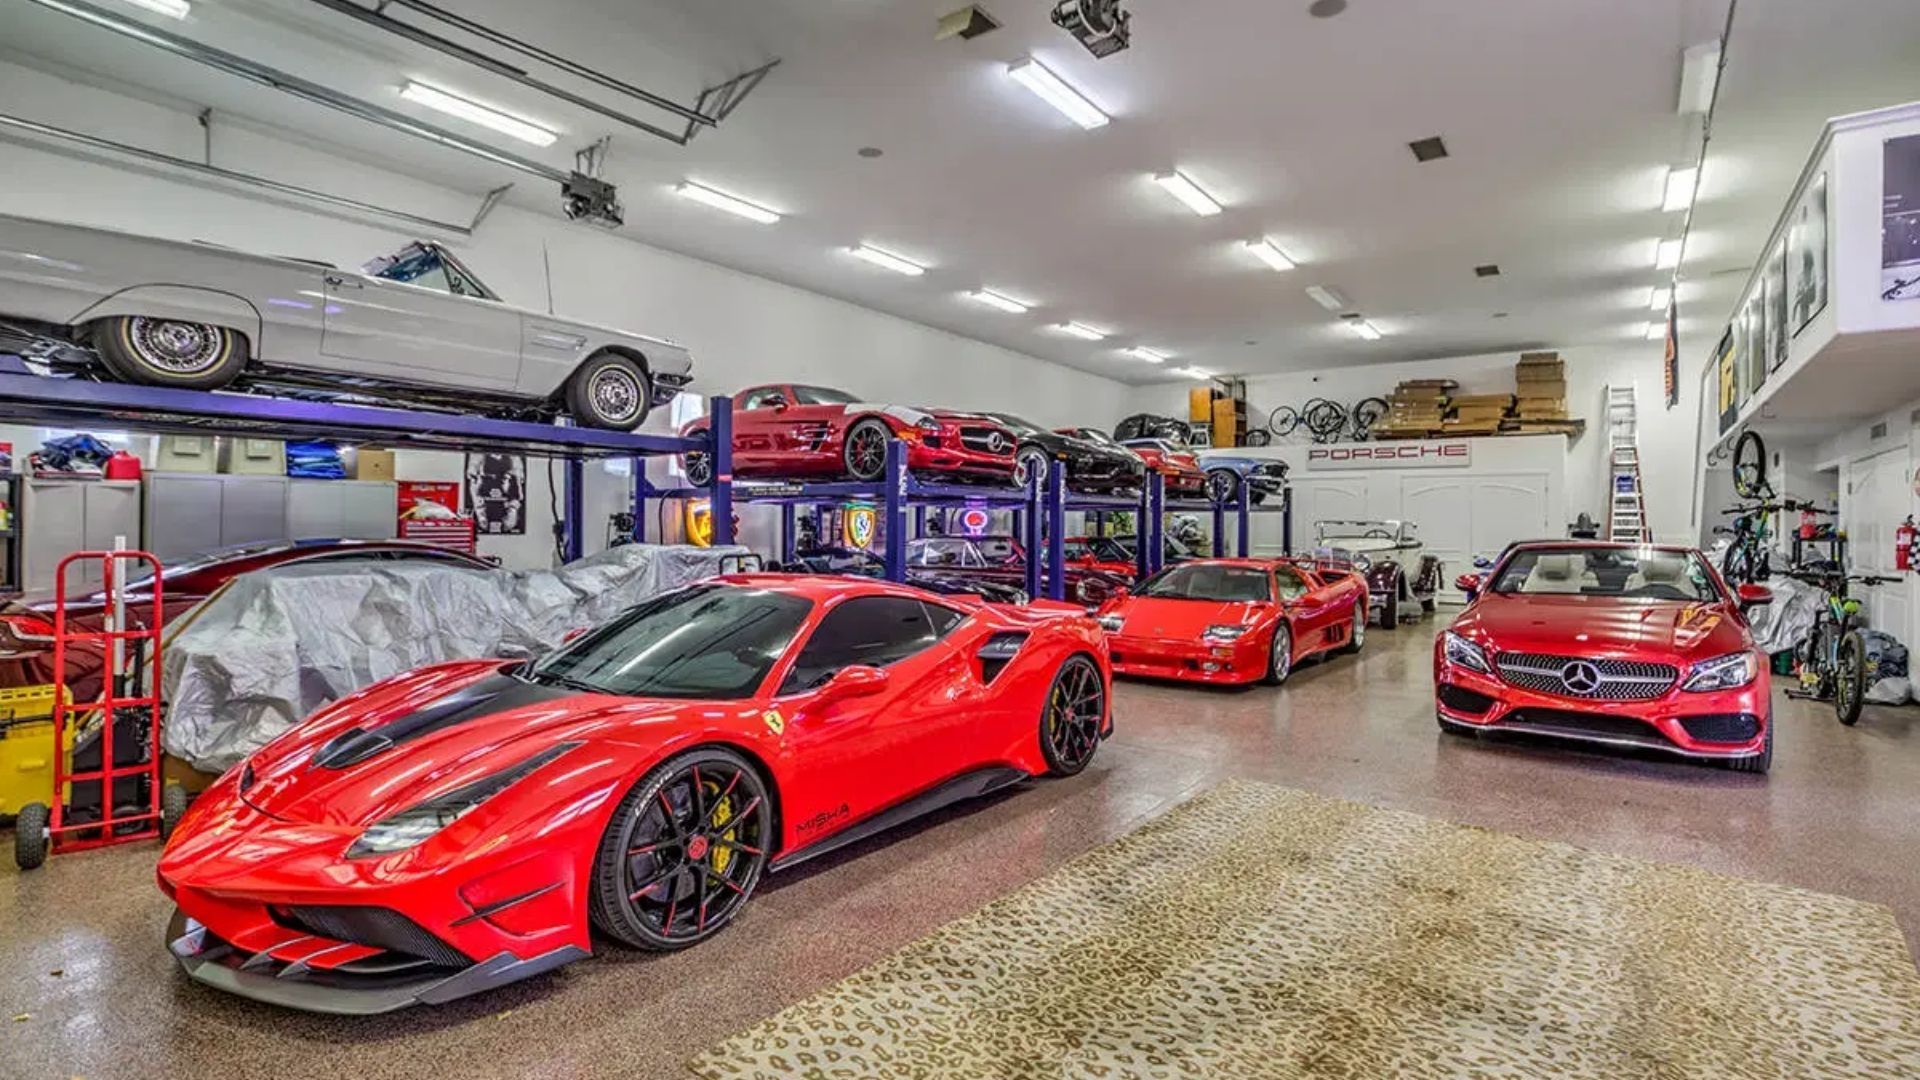 https://www.motorious.com/content/images/2021/03/Las-Vegas-Gearhead-Mansion-Listed-For-Sale-4.jpg